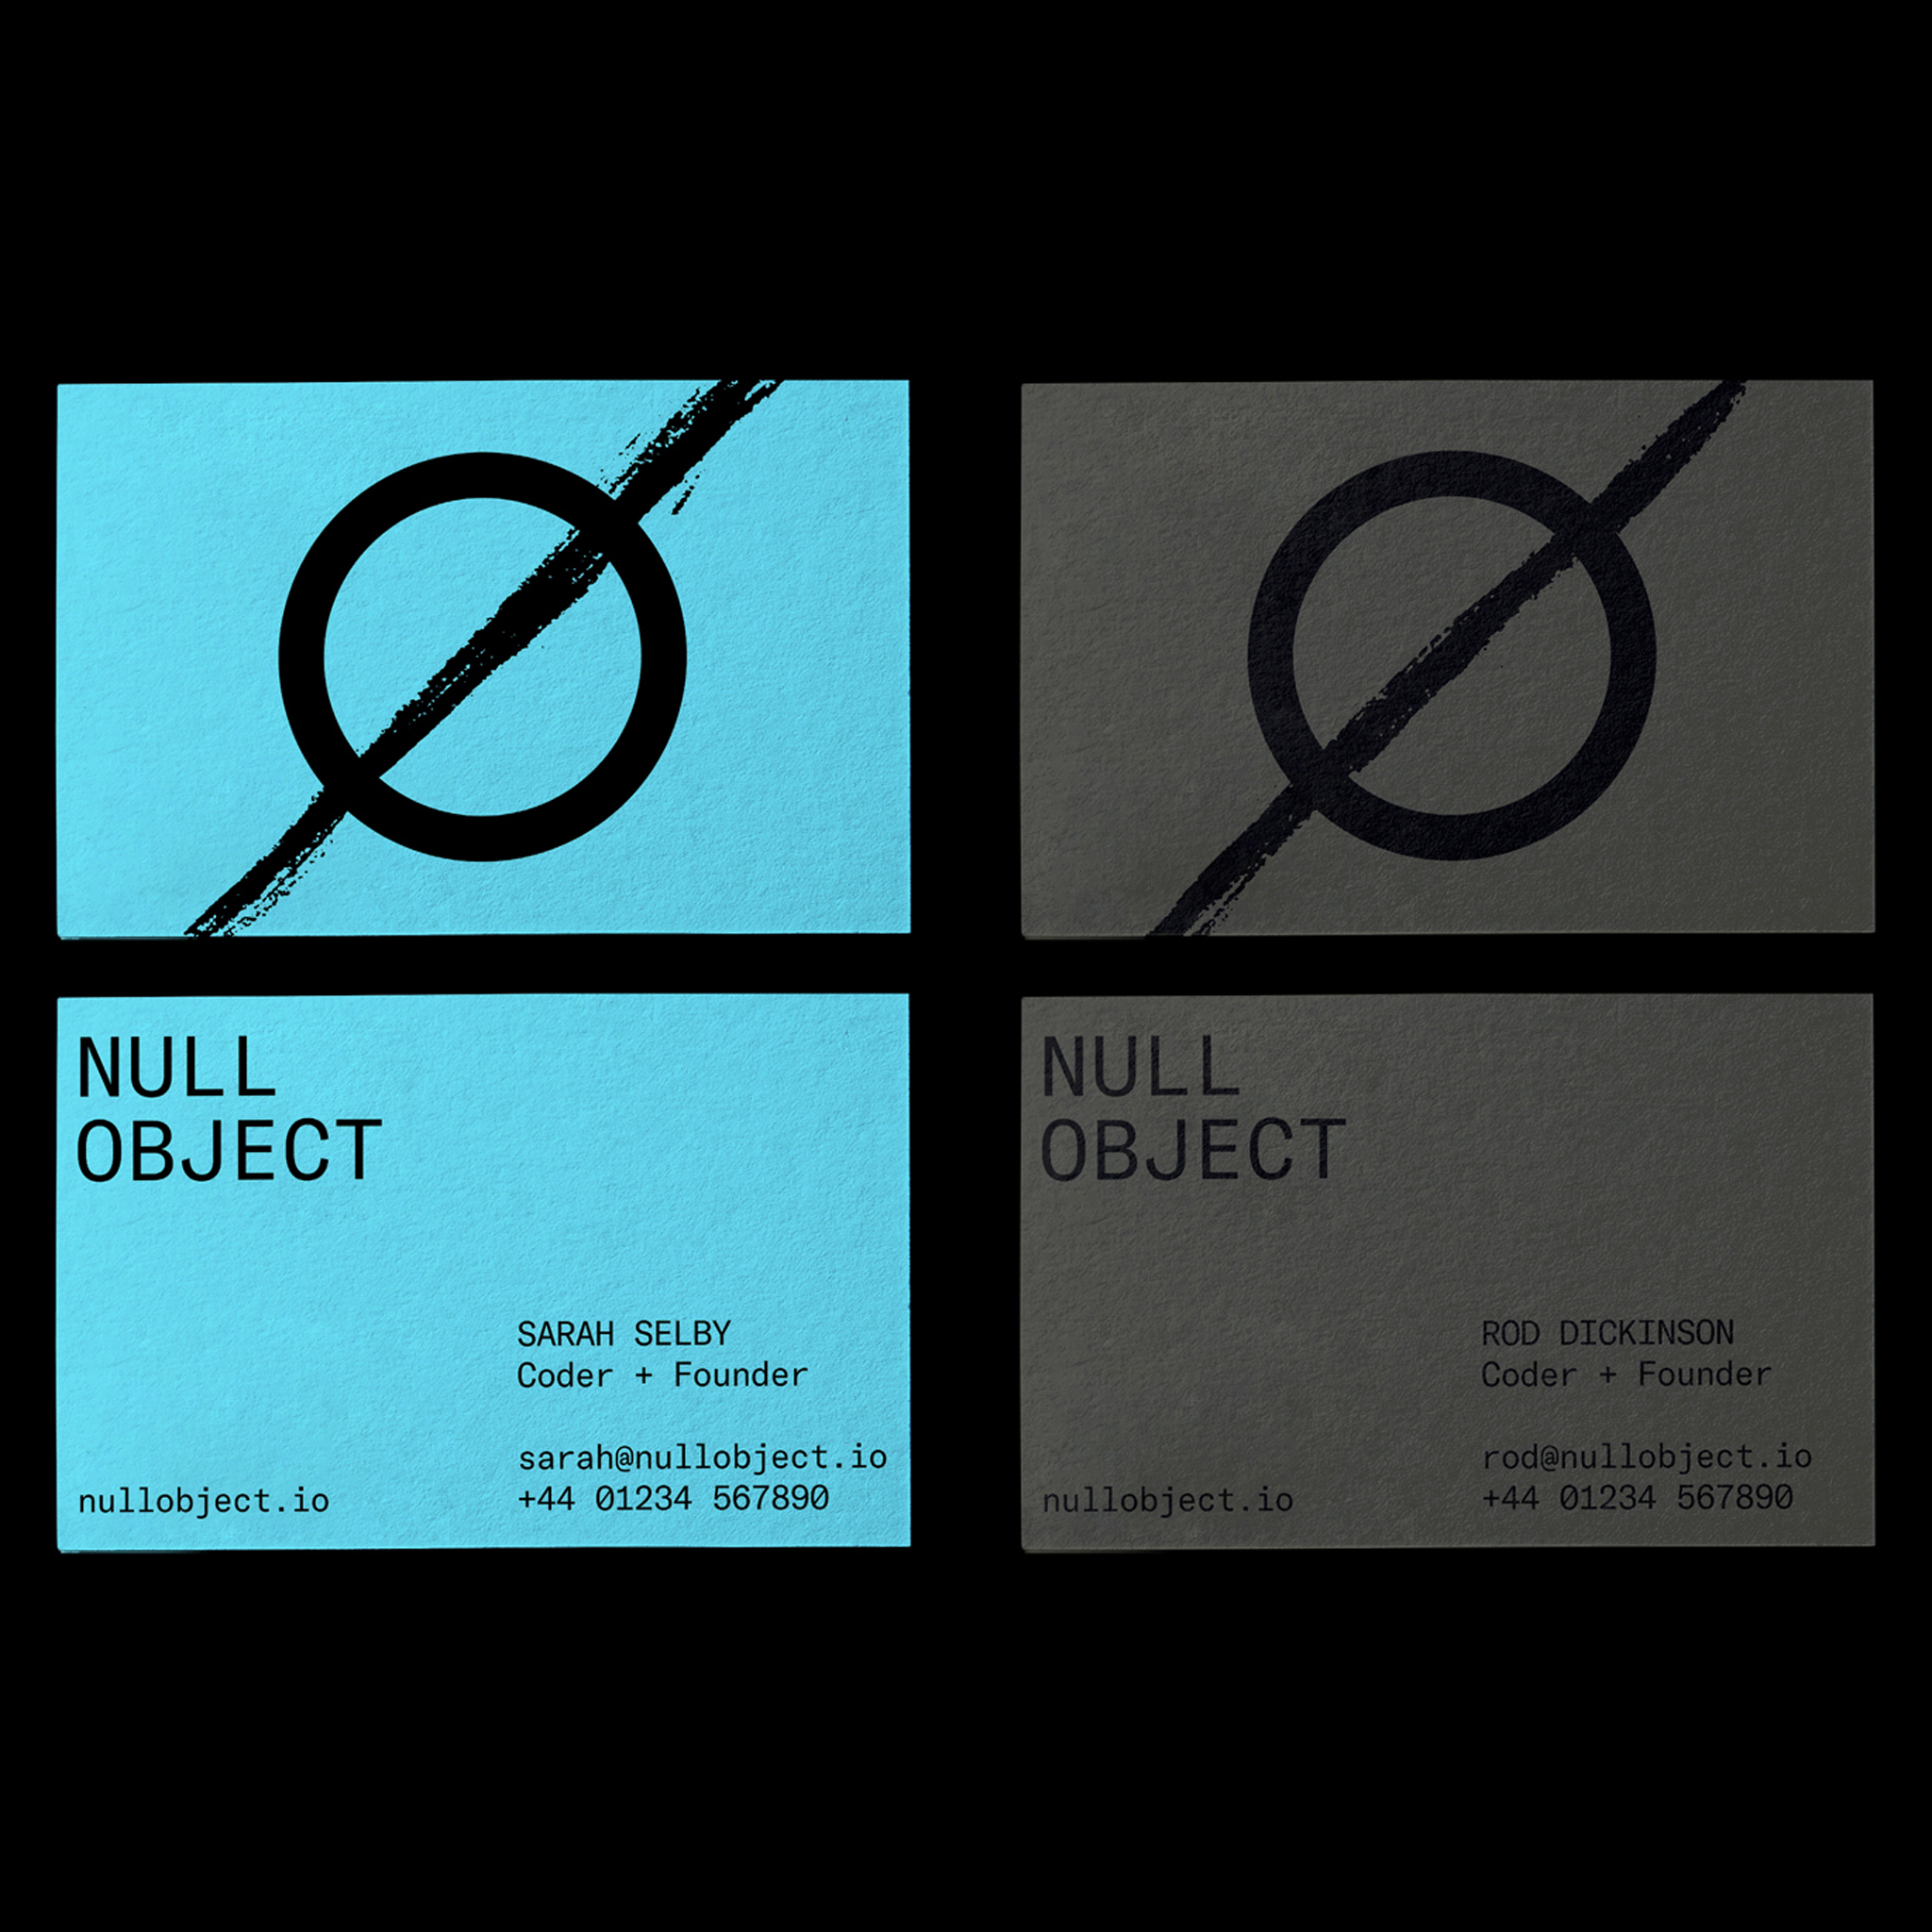 Null object marketing 20